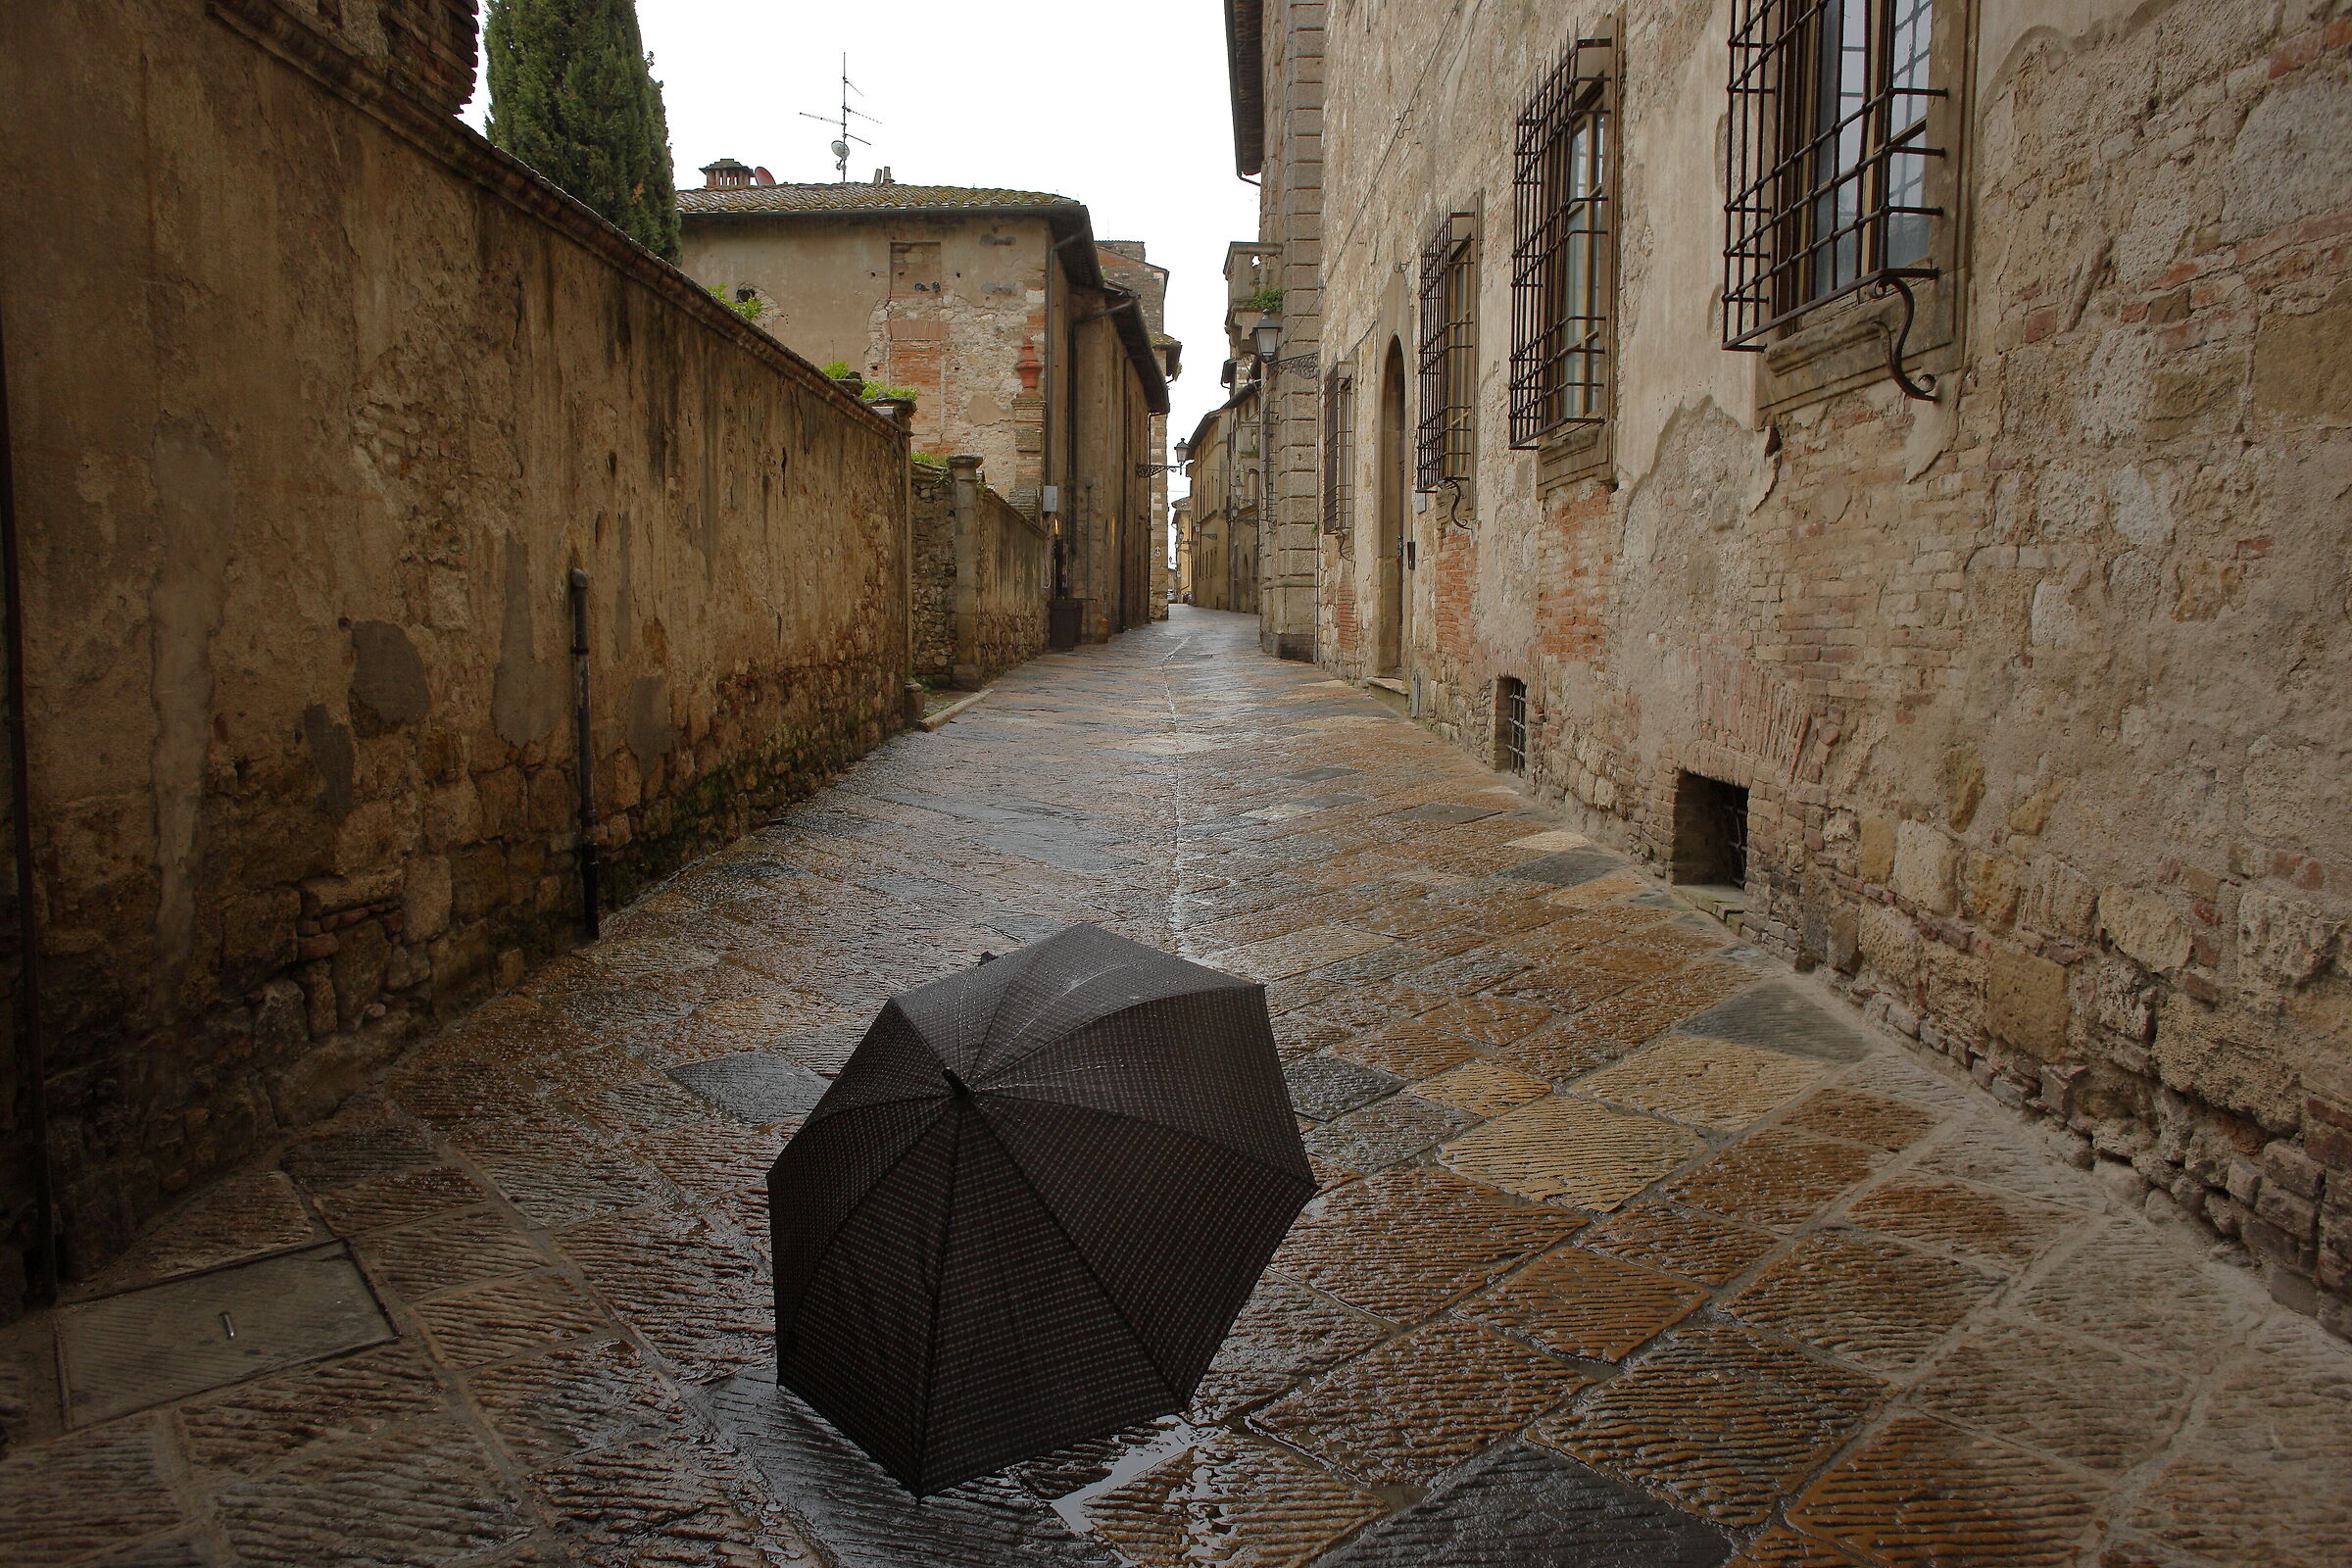 Rainy Easter Monday in Colle di Val D'Elsa...